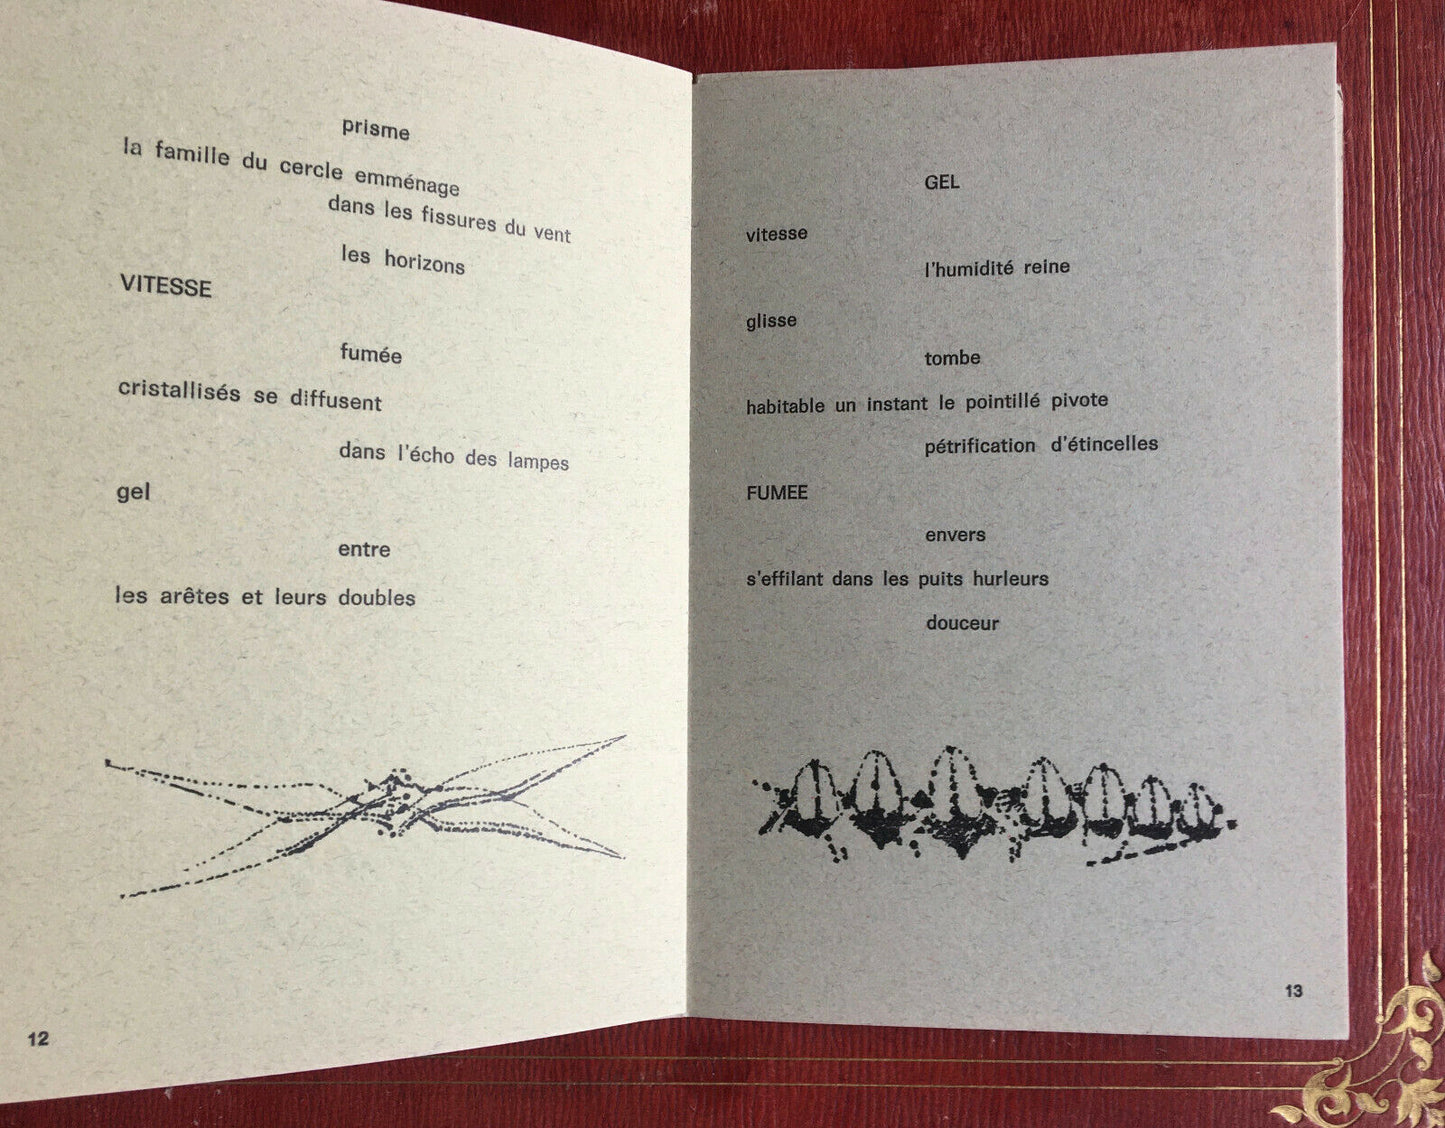 Cesare Peverelli, M. Butor, G. Limbour — exhibition catalog signed by W. Mucha — 1969.